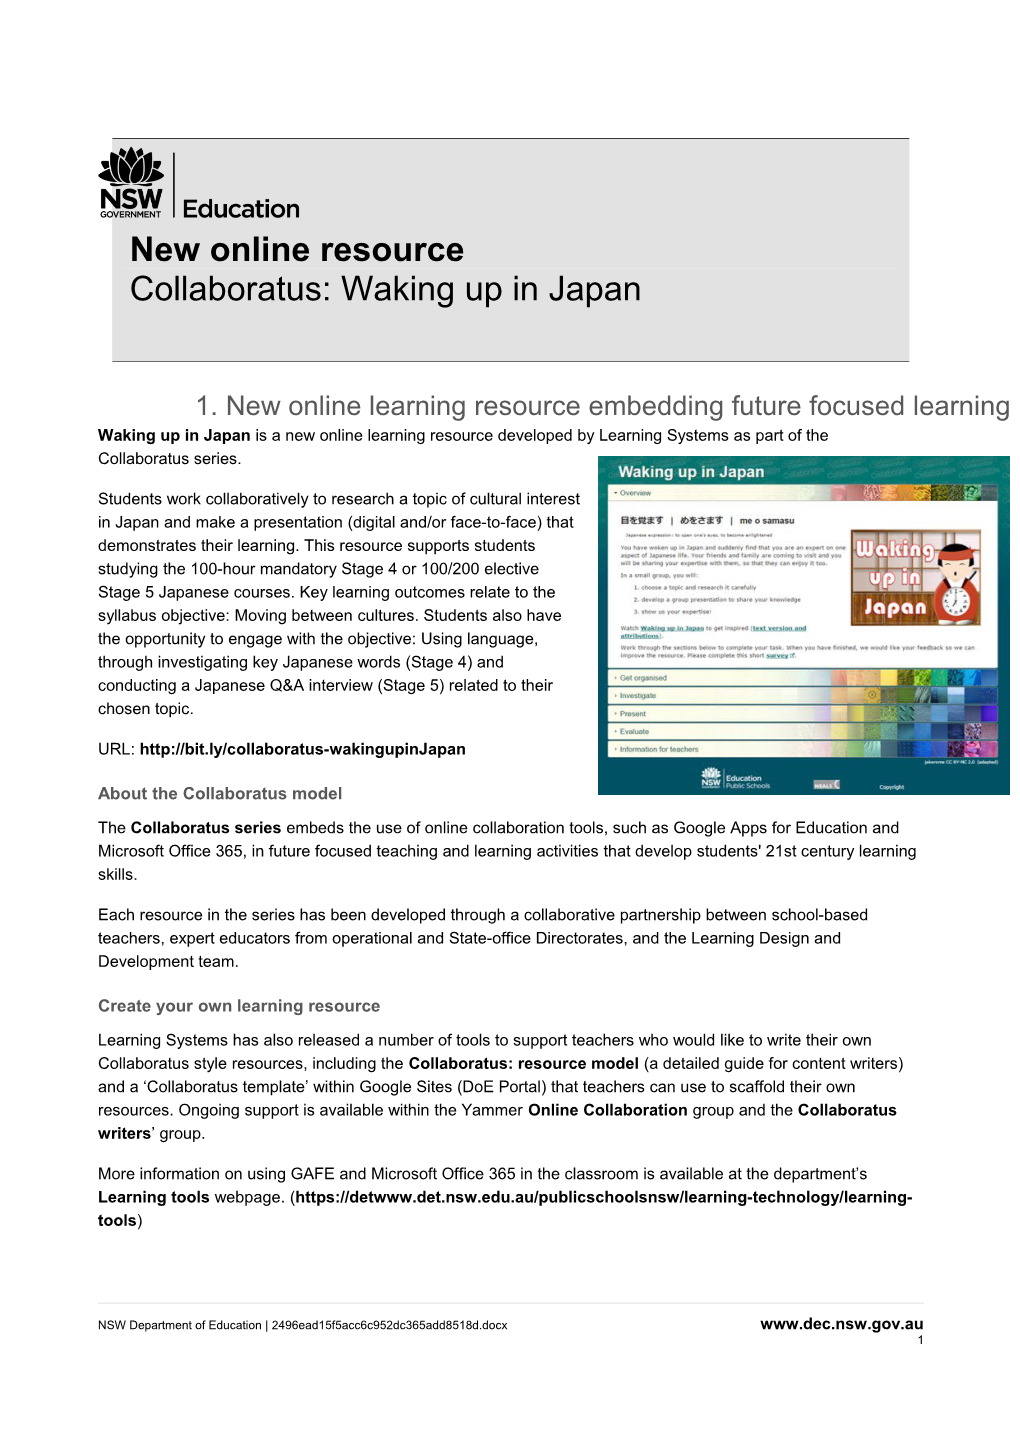 New Online Learning Resource Embedding Future Focused Learning